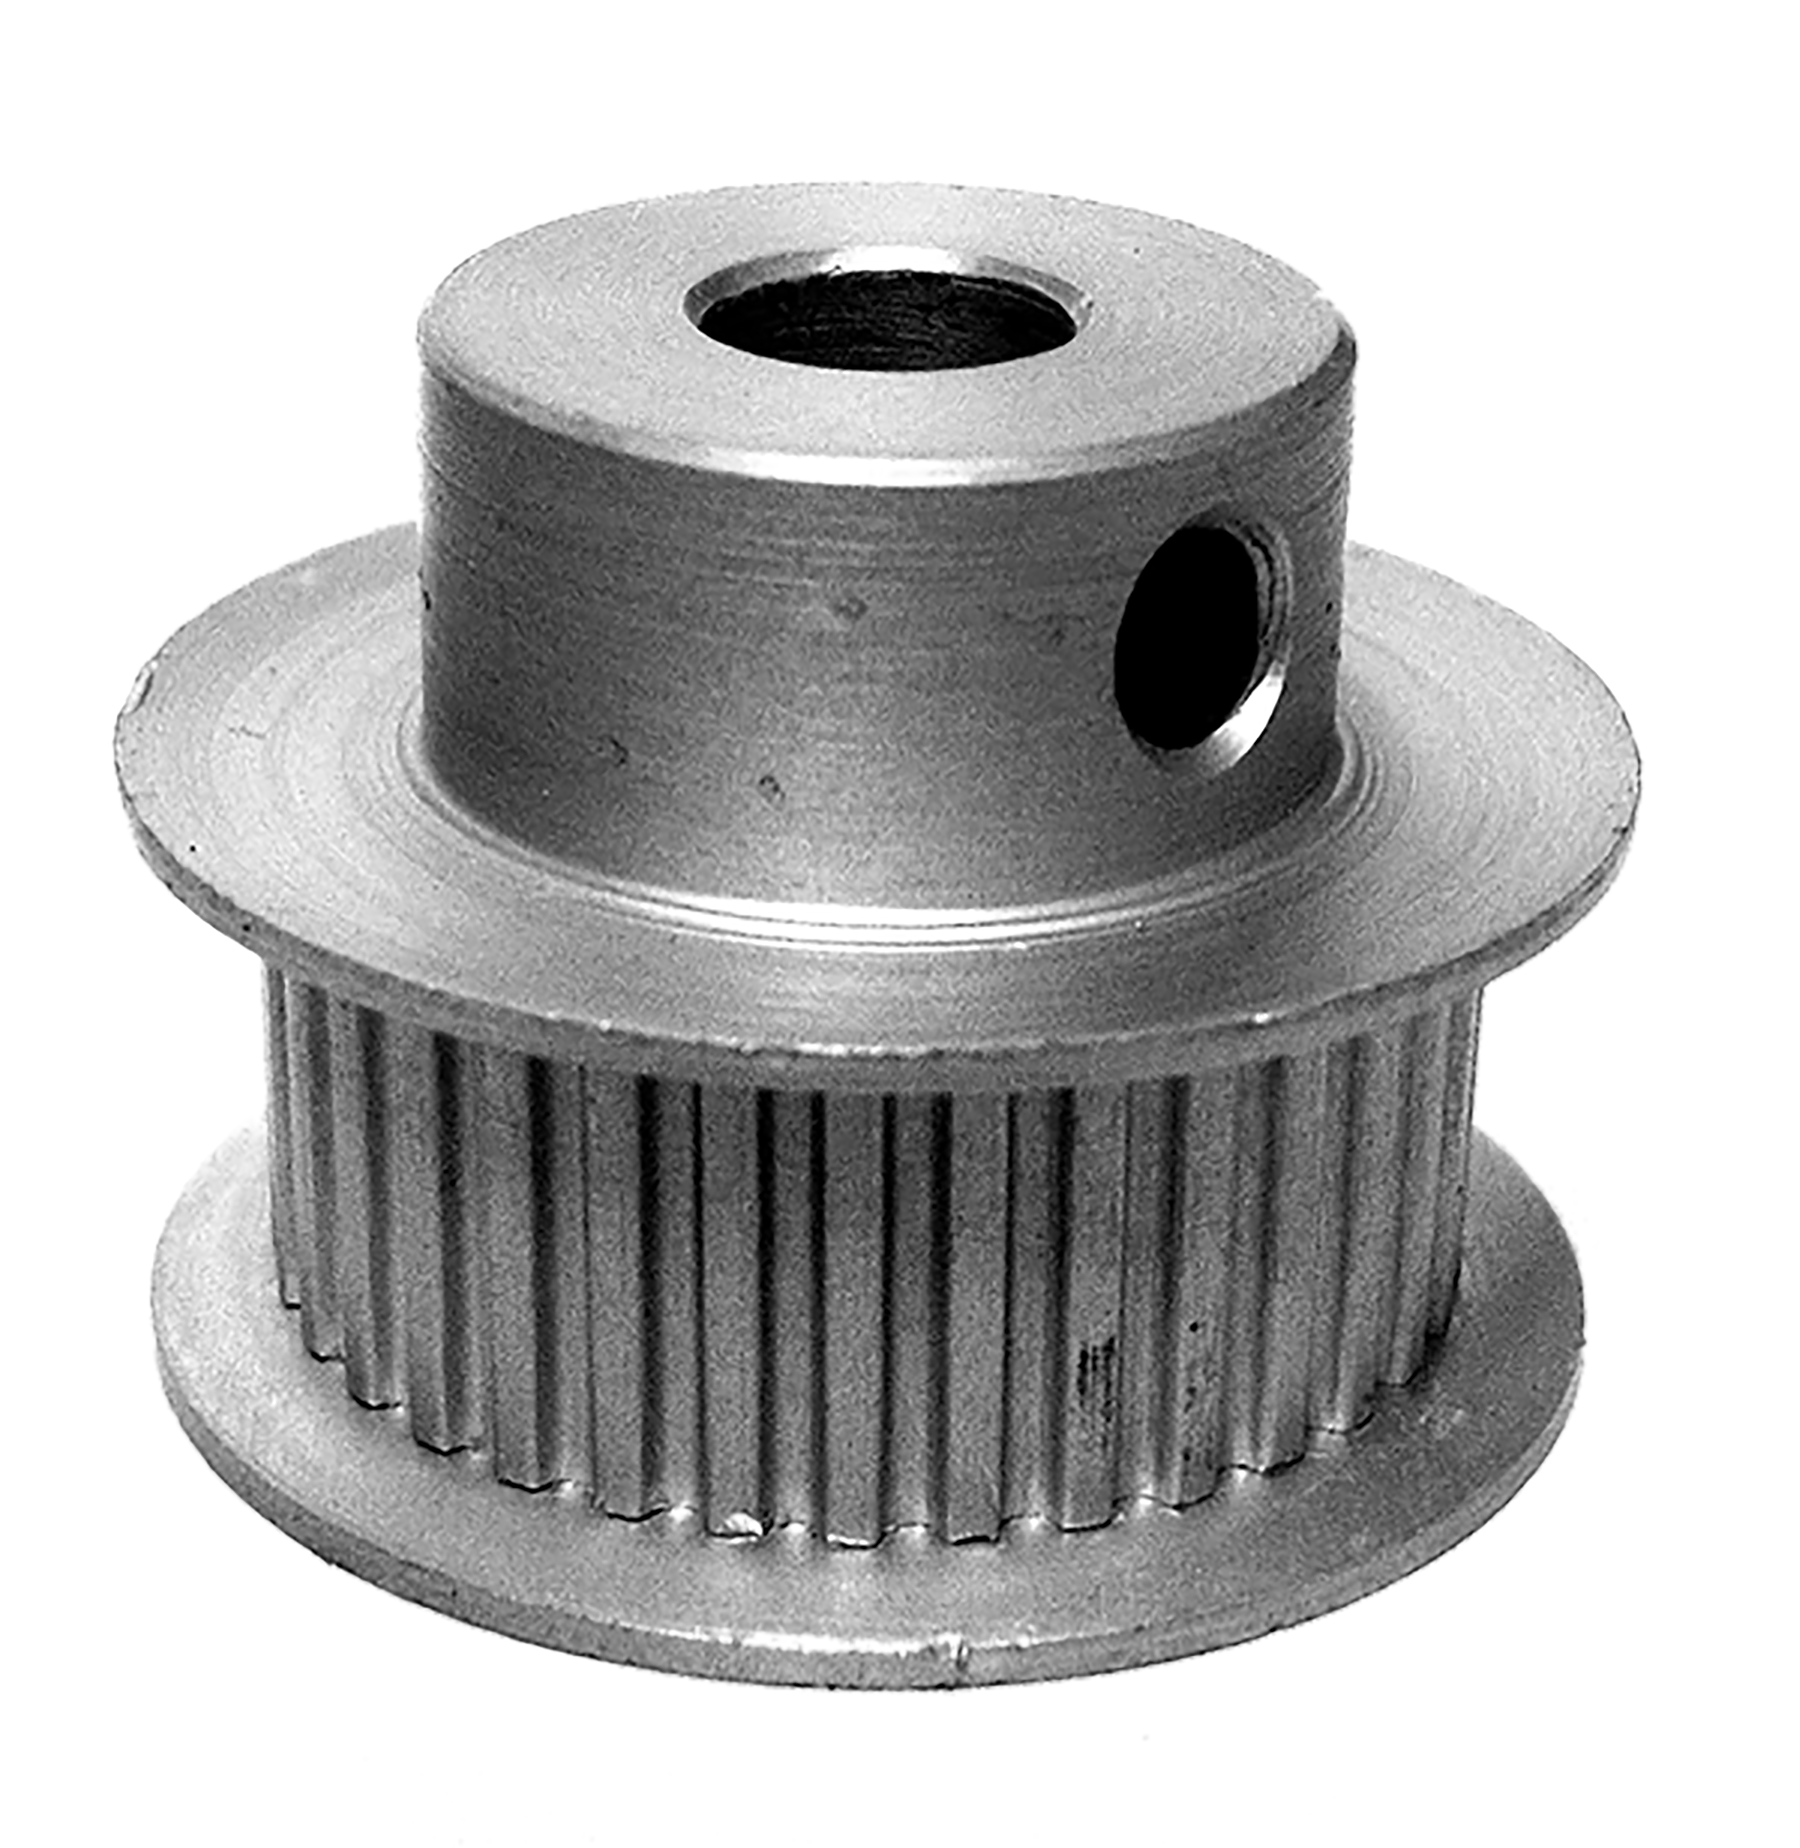 36LT312-6FA3 - Aluminum Imperial Pitch Pulleys